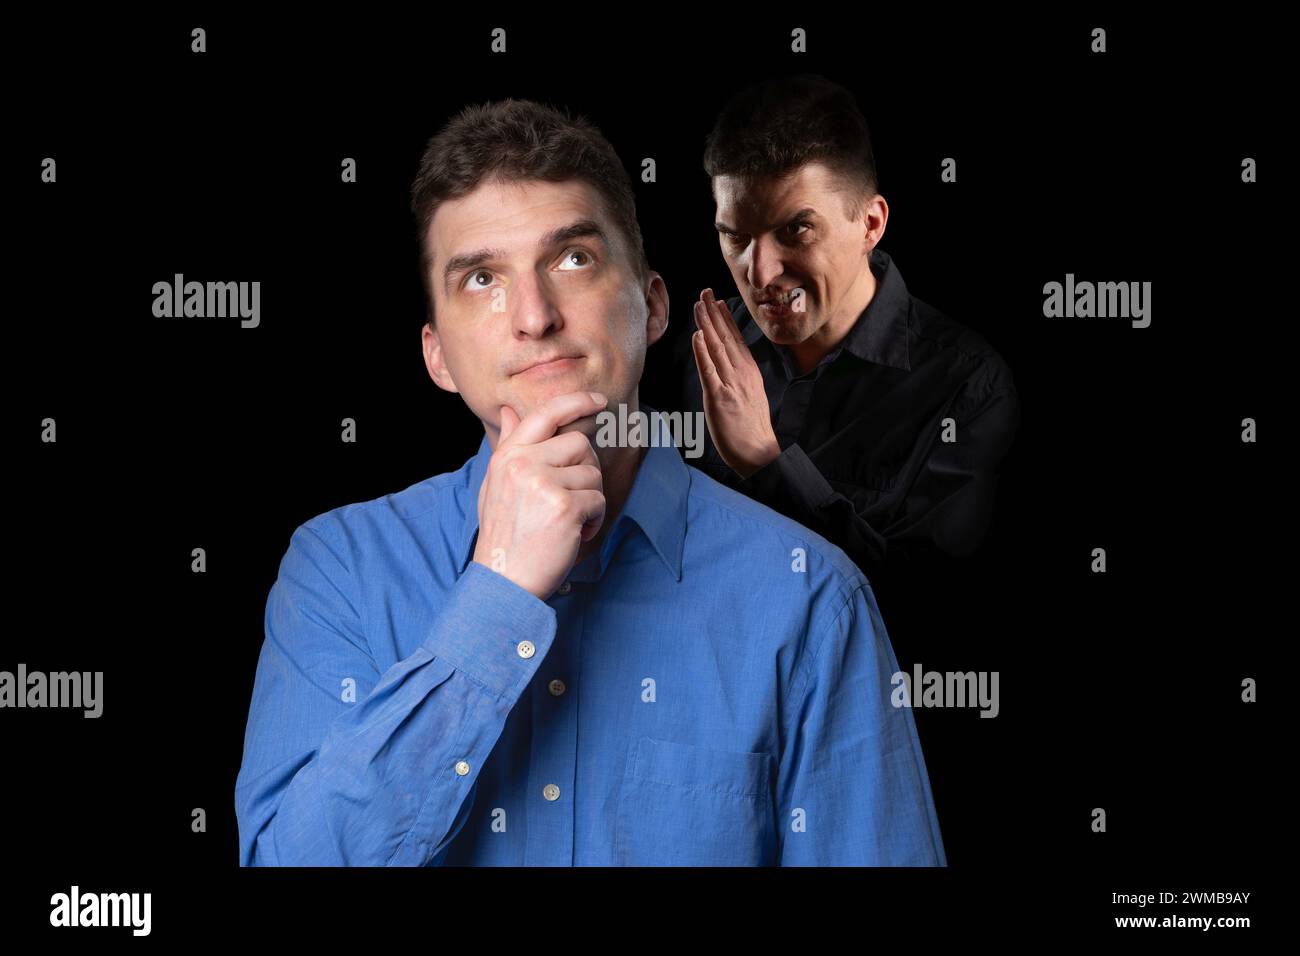 A friendly-looking young man to whom his evil inner voice is whispering something from the shadow behind Stock Photo